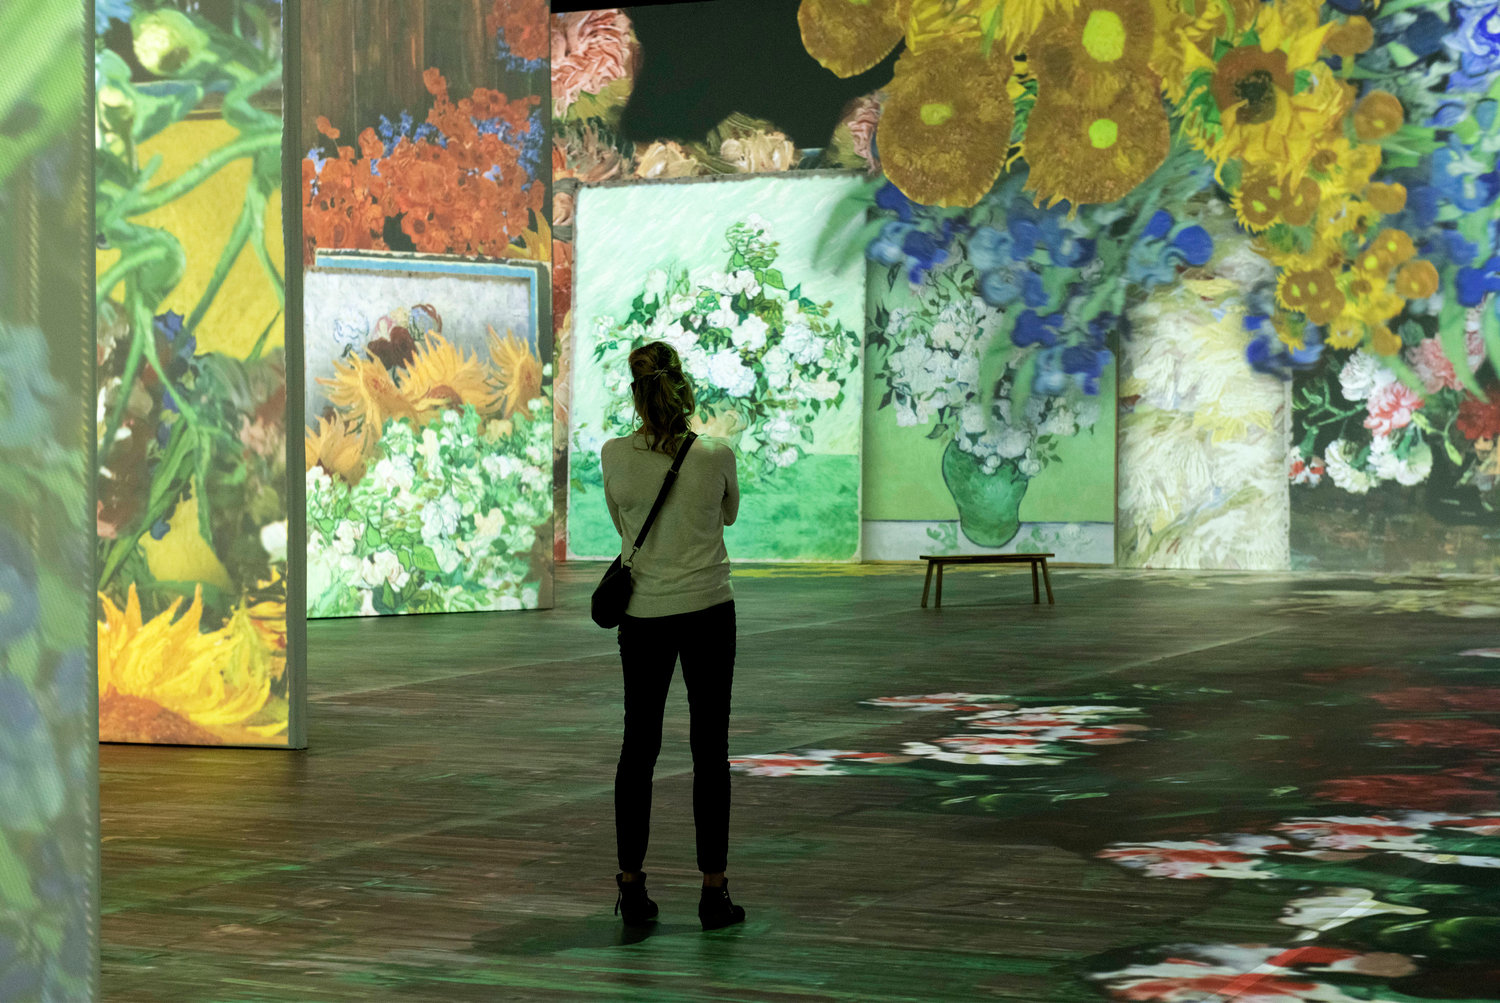 Don’t miss your chance to experience Beyond Van Gogh, through July 8